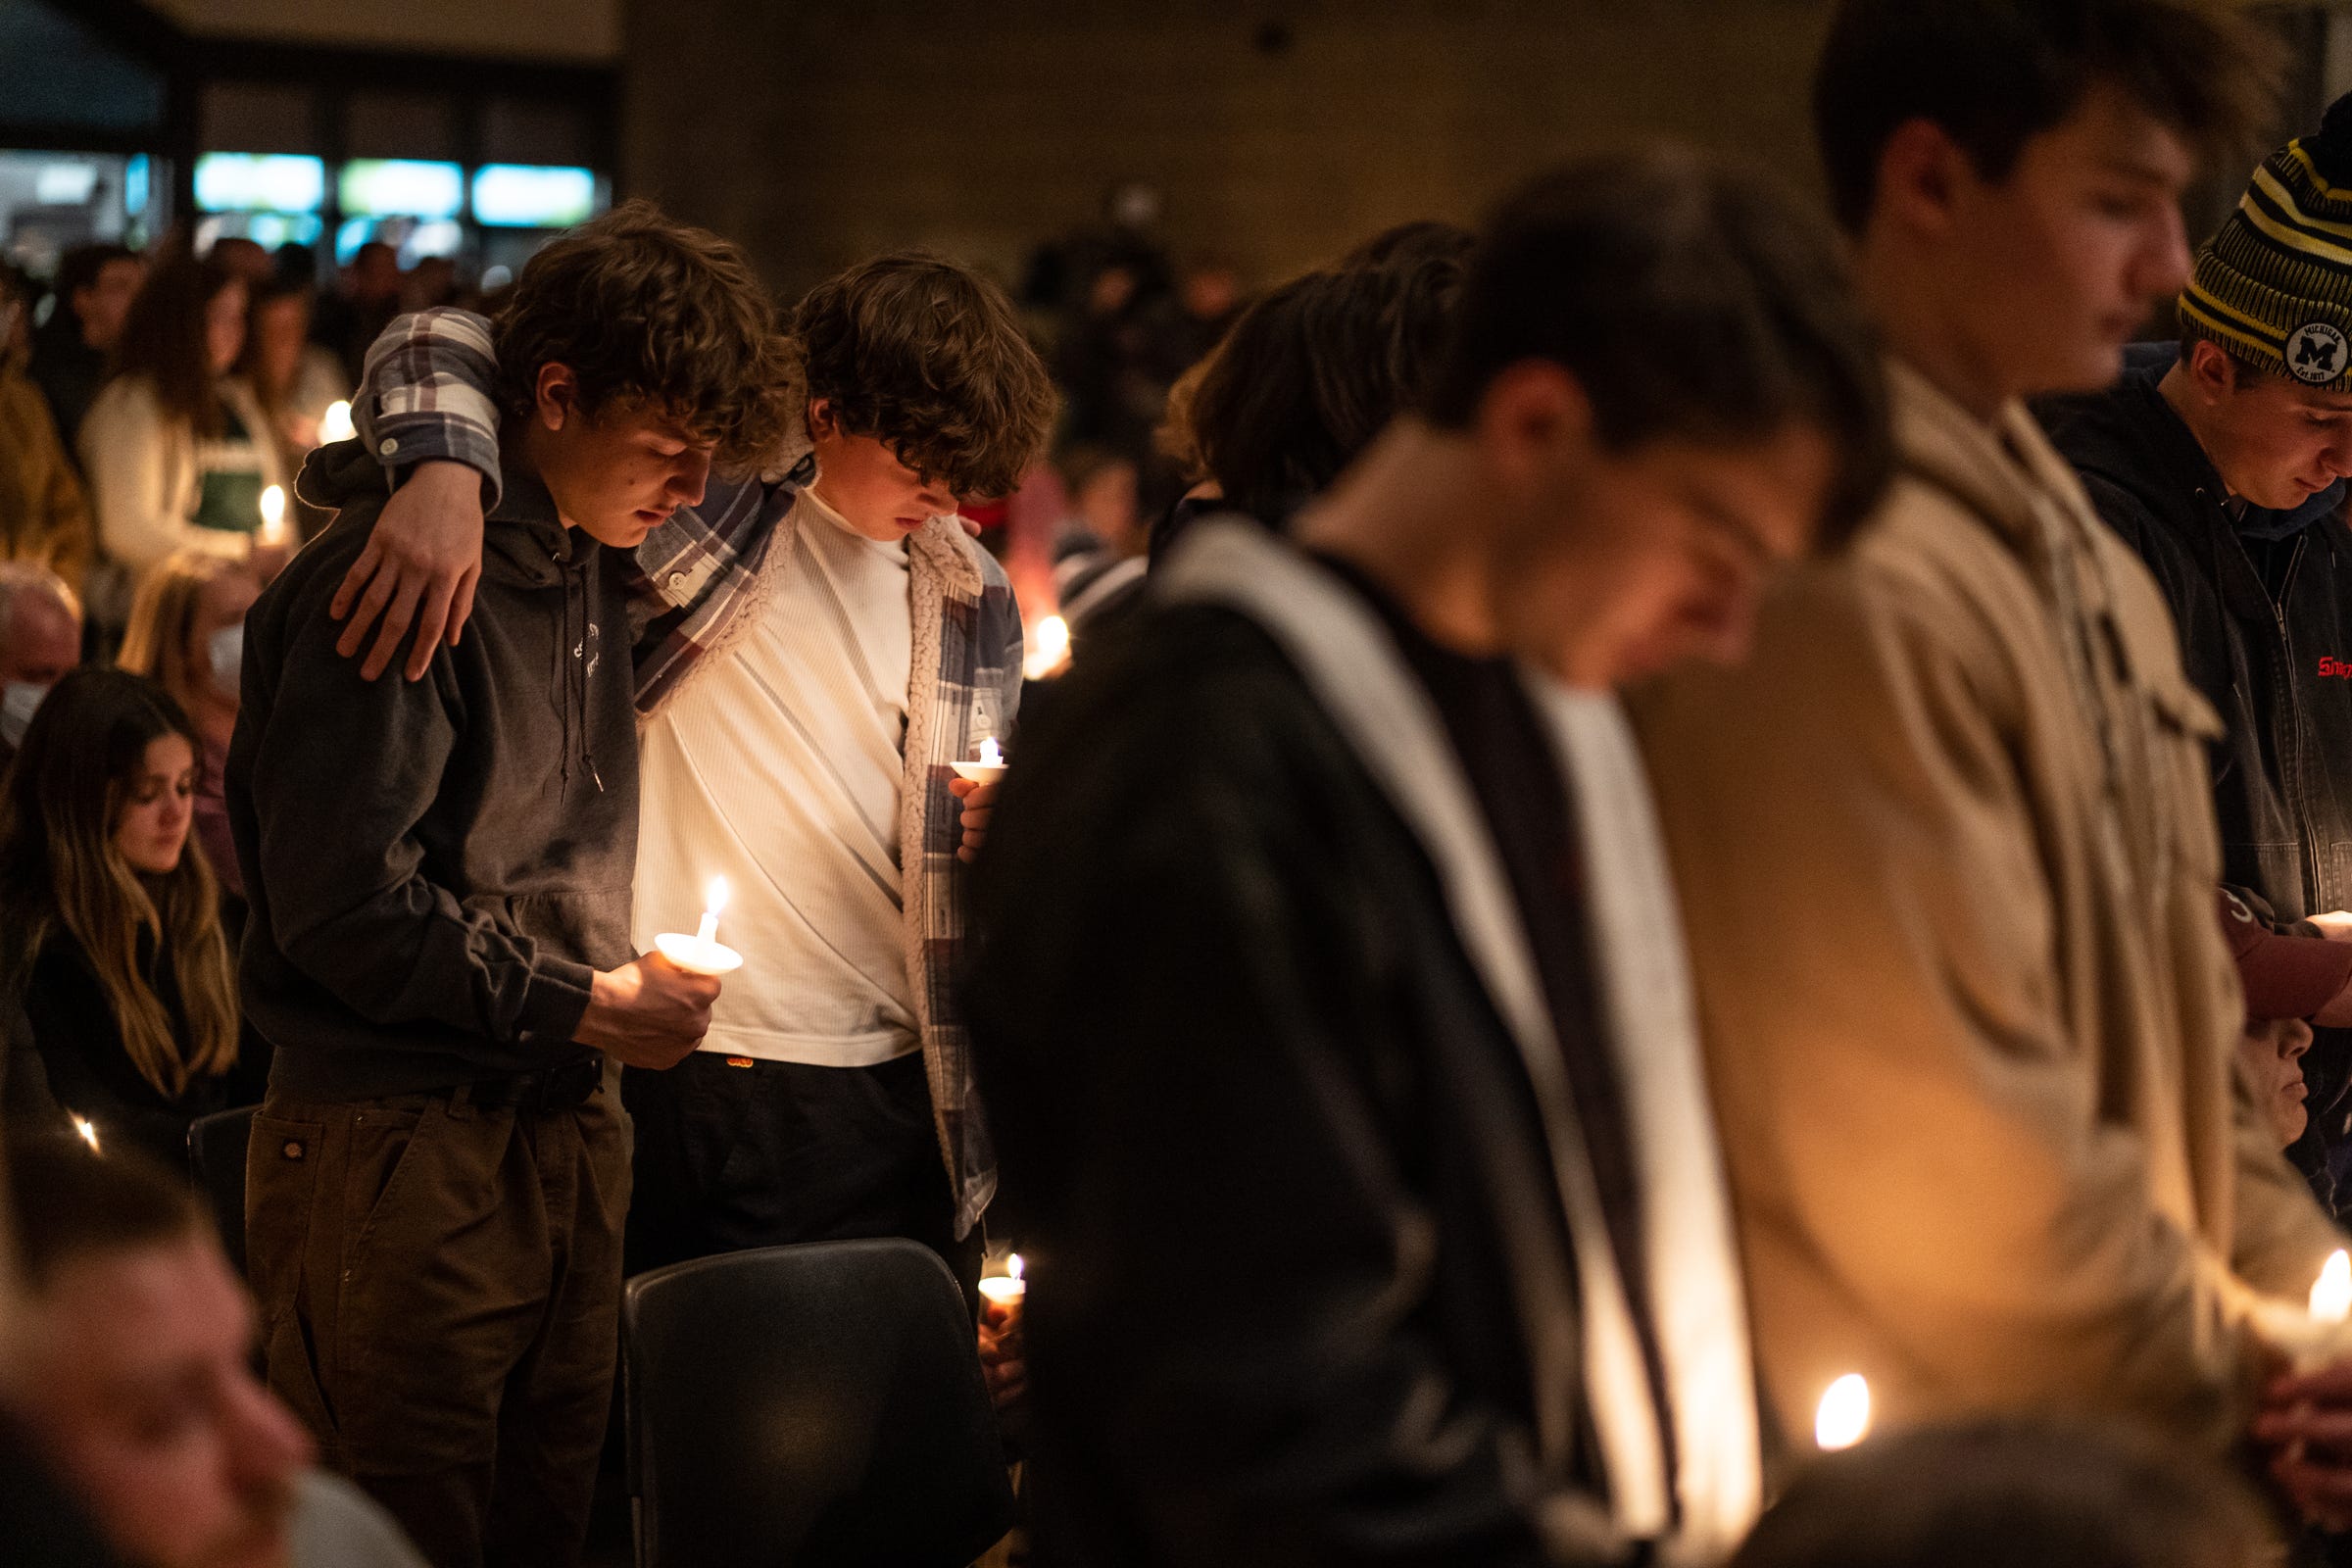 Oxford High School students who were present during the school shooting stand during a prayer vigil at LakePoint Community Church in Oxford following an active shooter situation at Oxford High School in Oxford on November 30, 2021. Police took a suspected shooter into custody and there were multiple victims, the Oakland County Sheriff's office said.